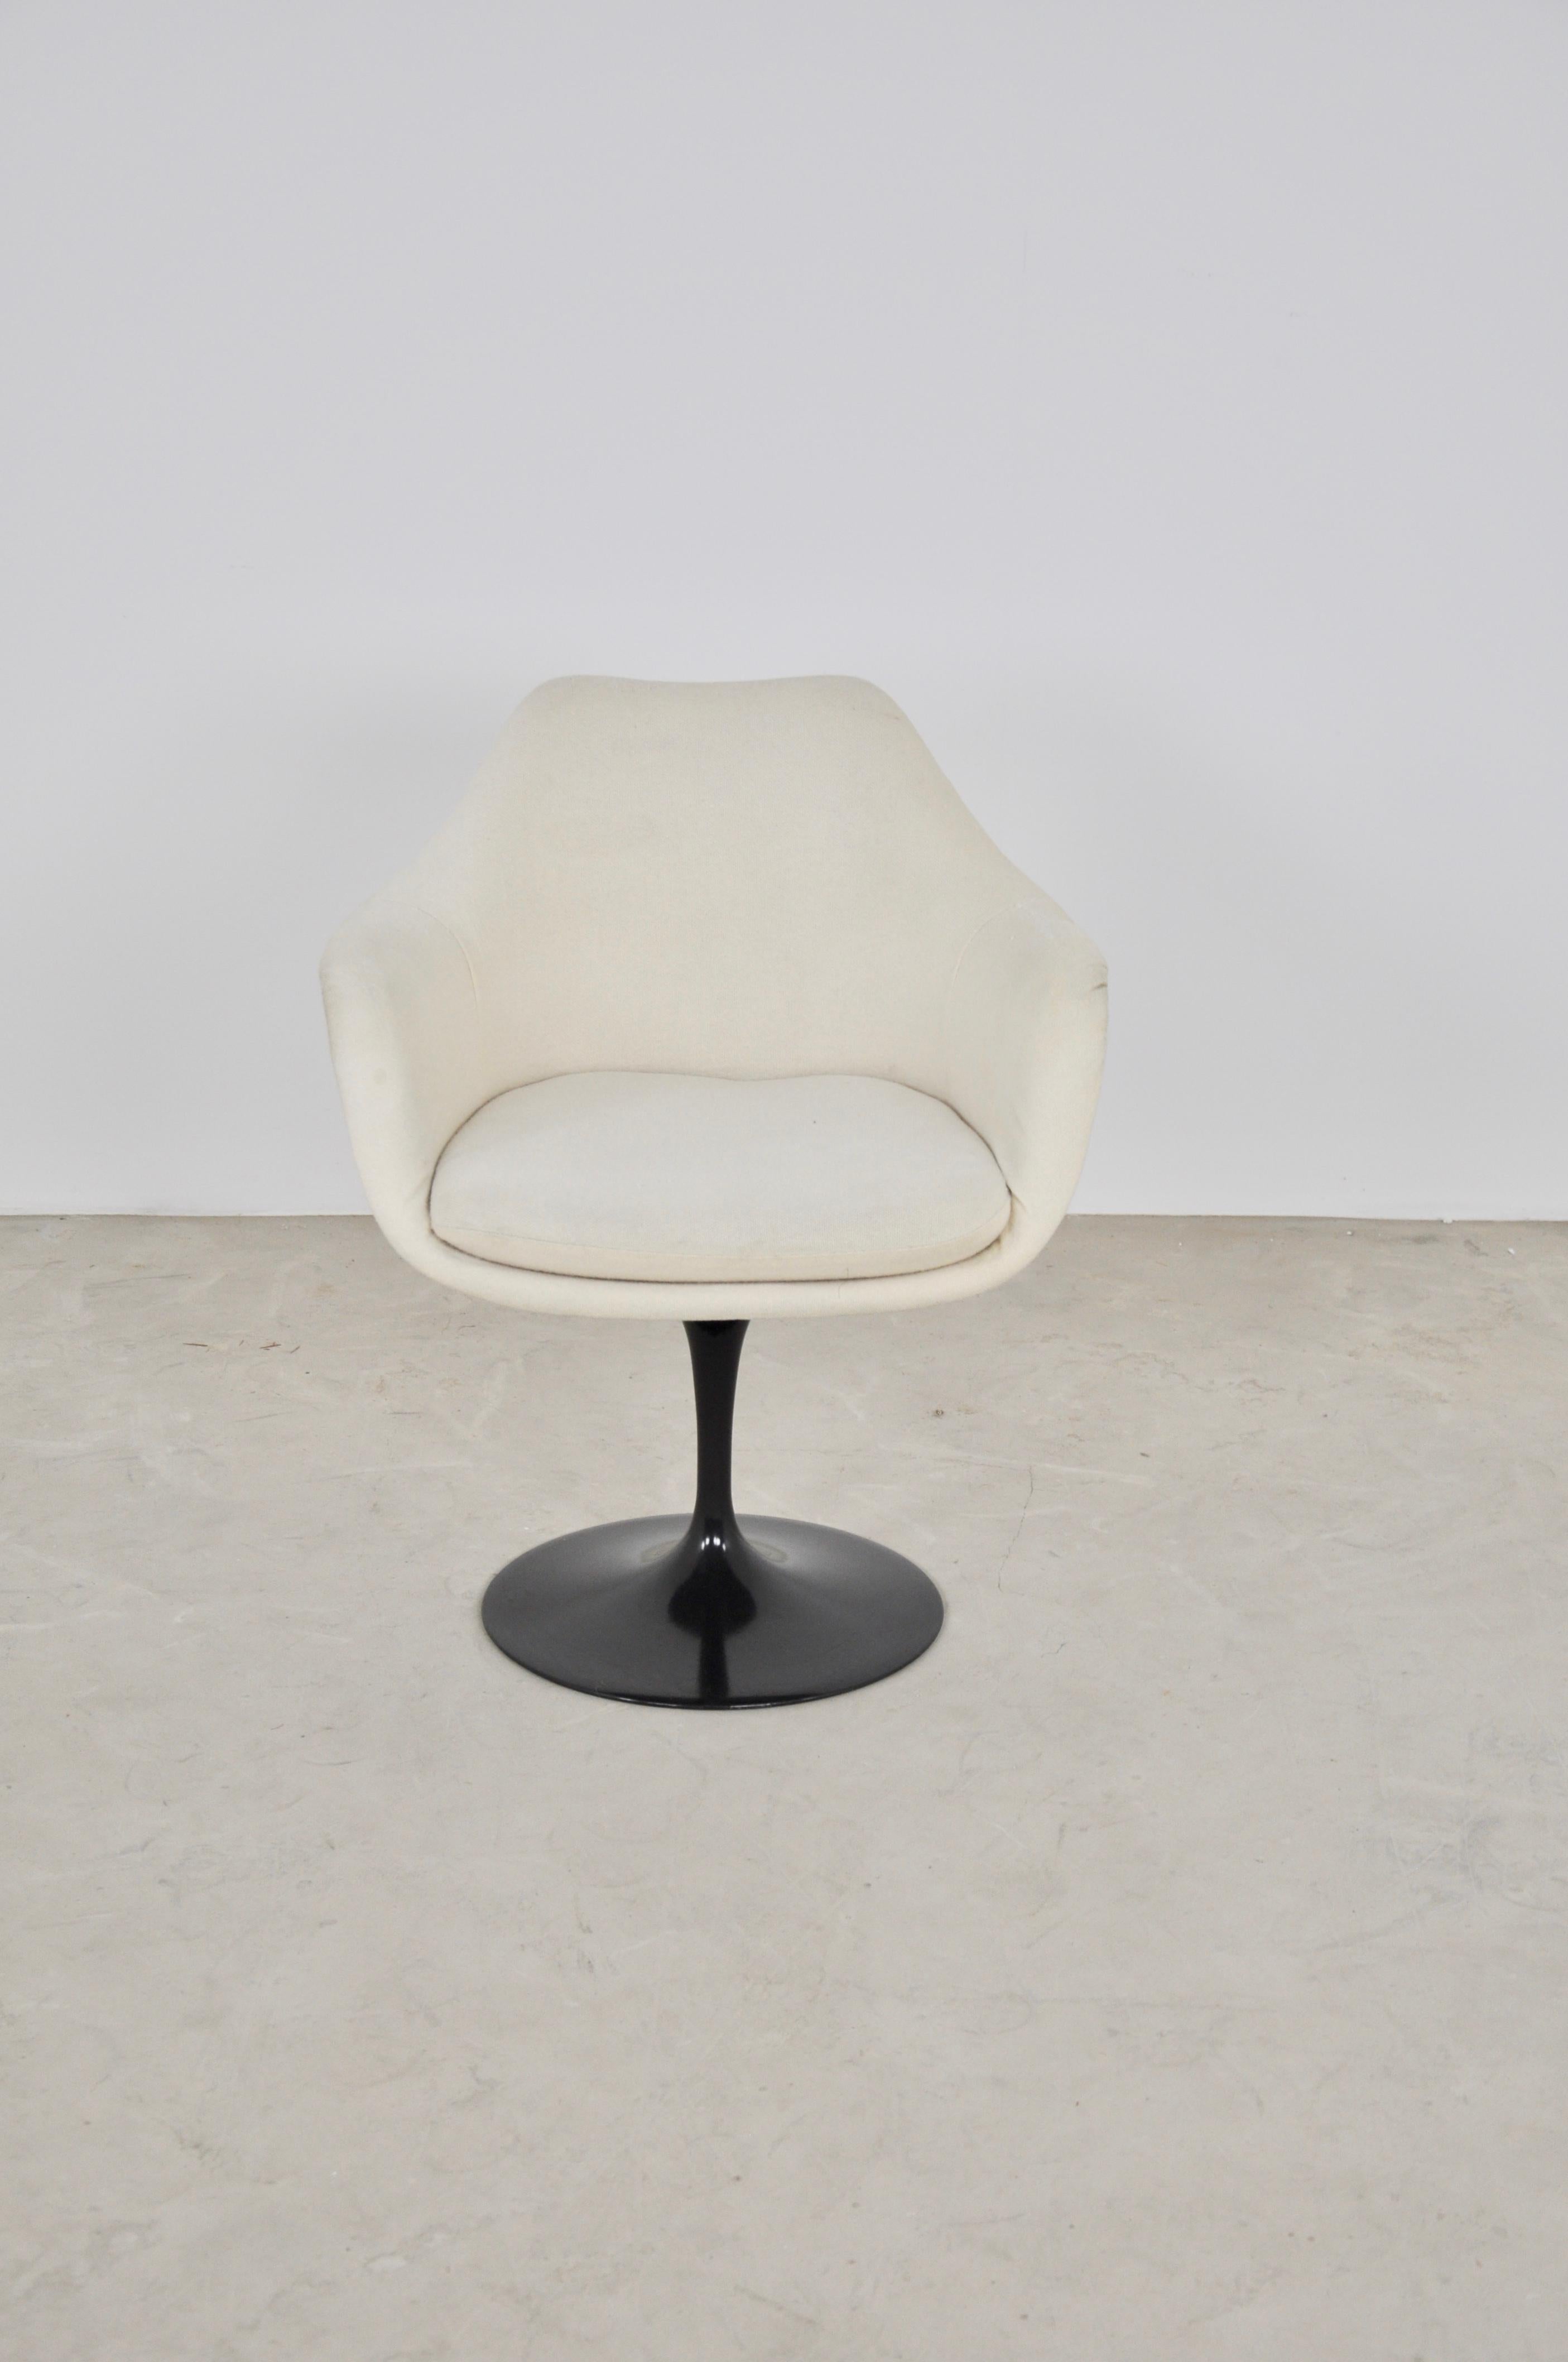 Armchair in white color fabric. Black structure. Wear and tear due to time and age of the armchair (see photo).